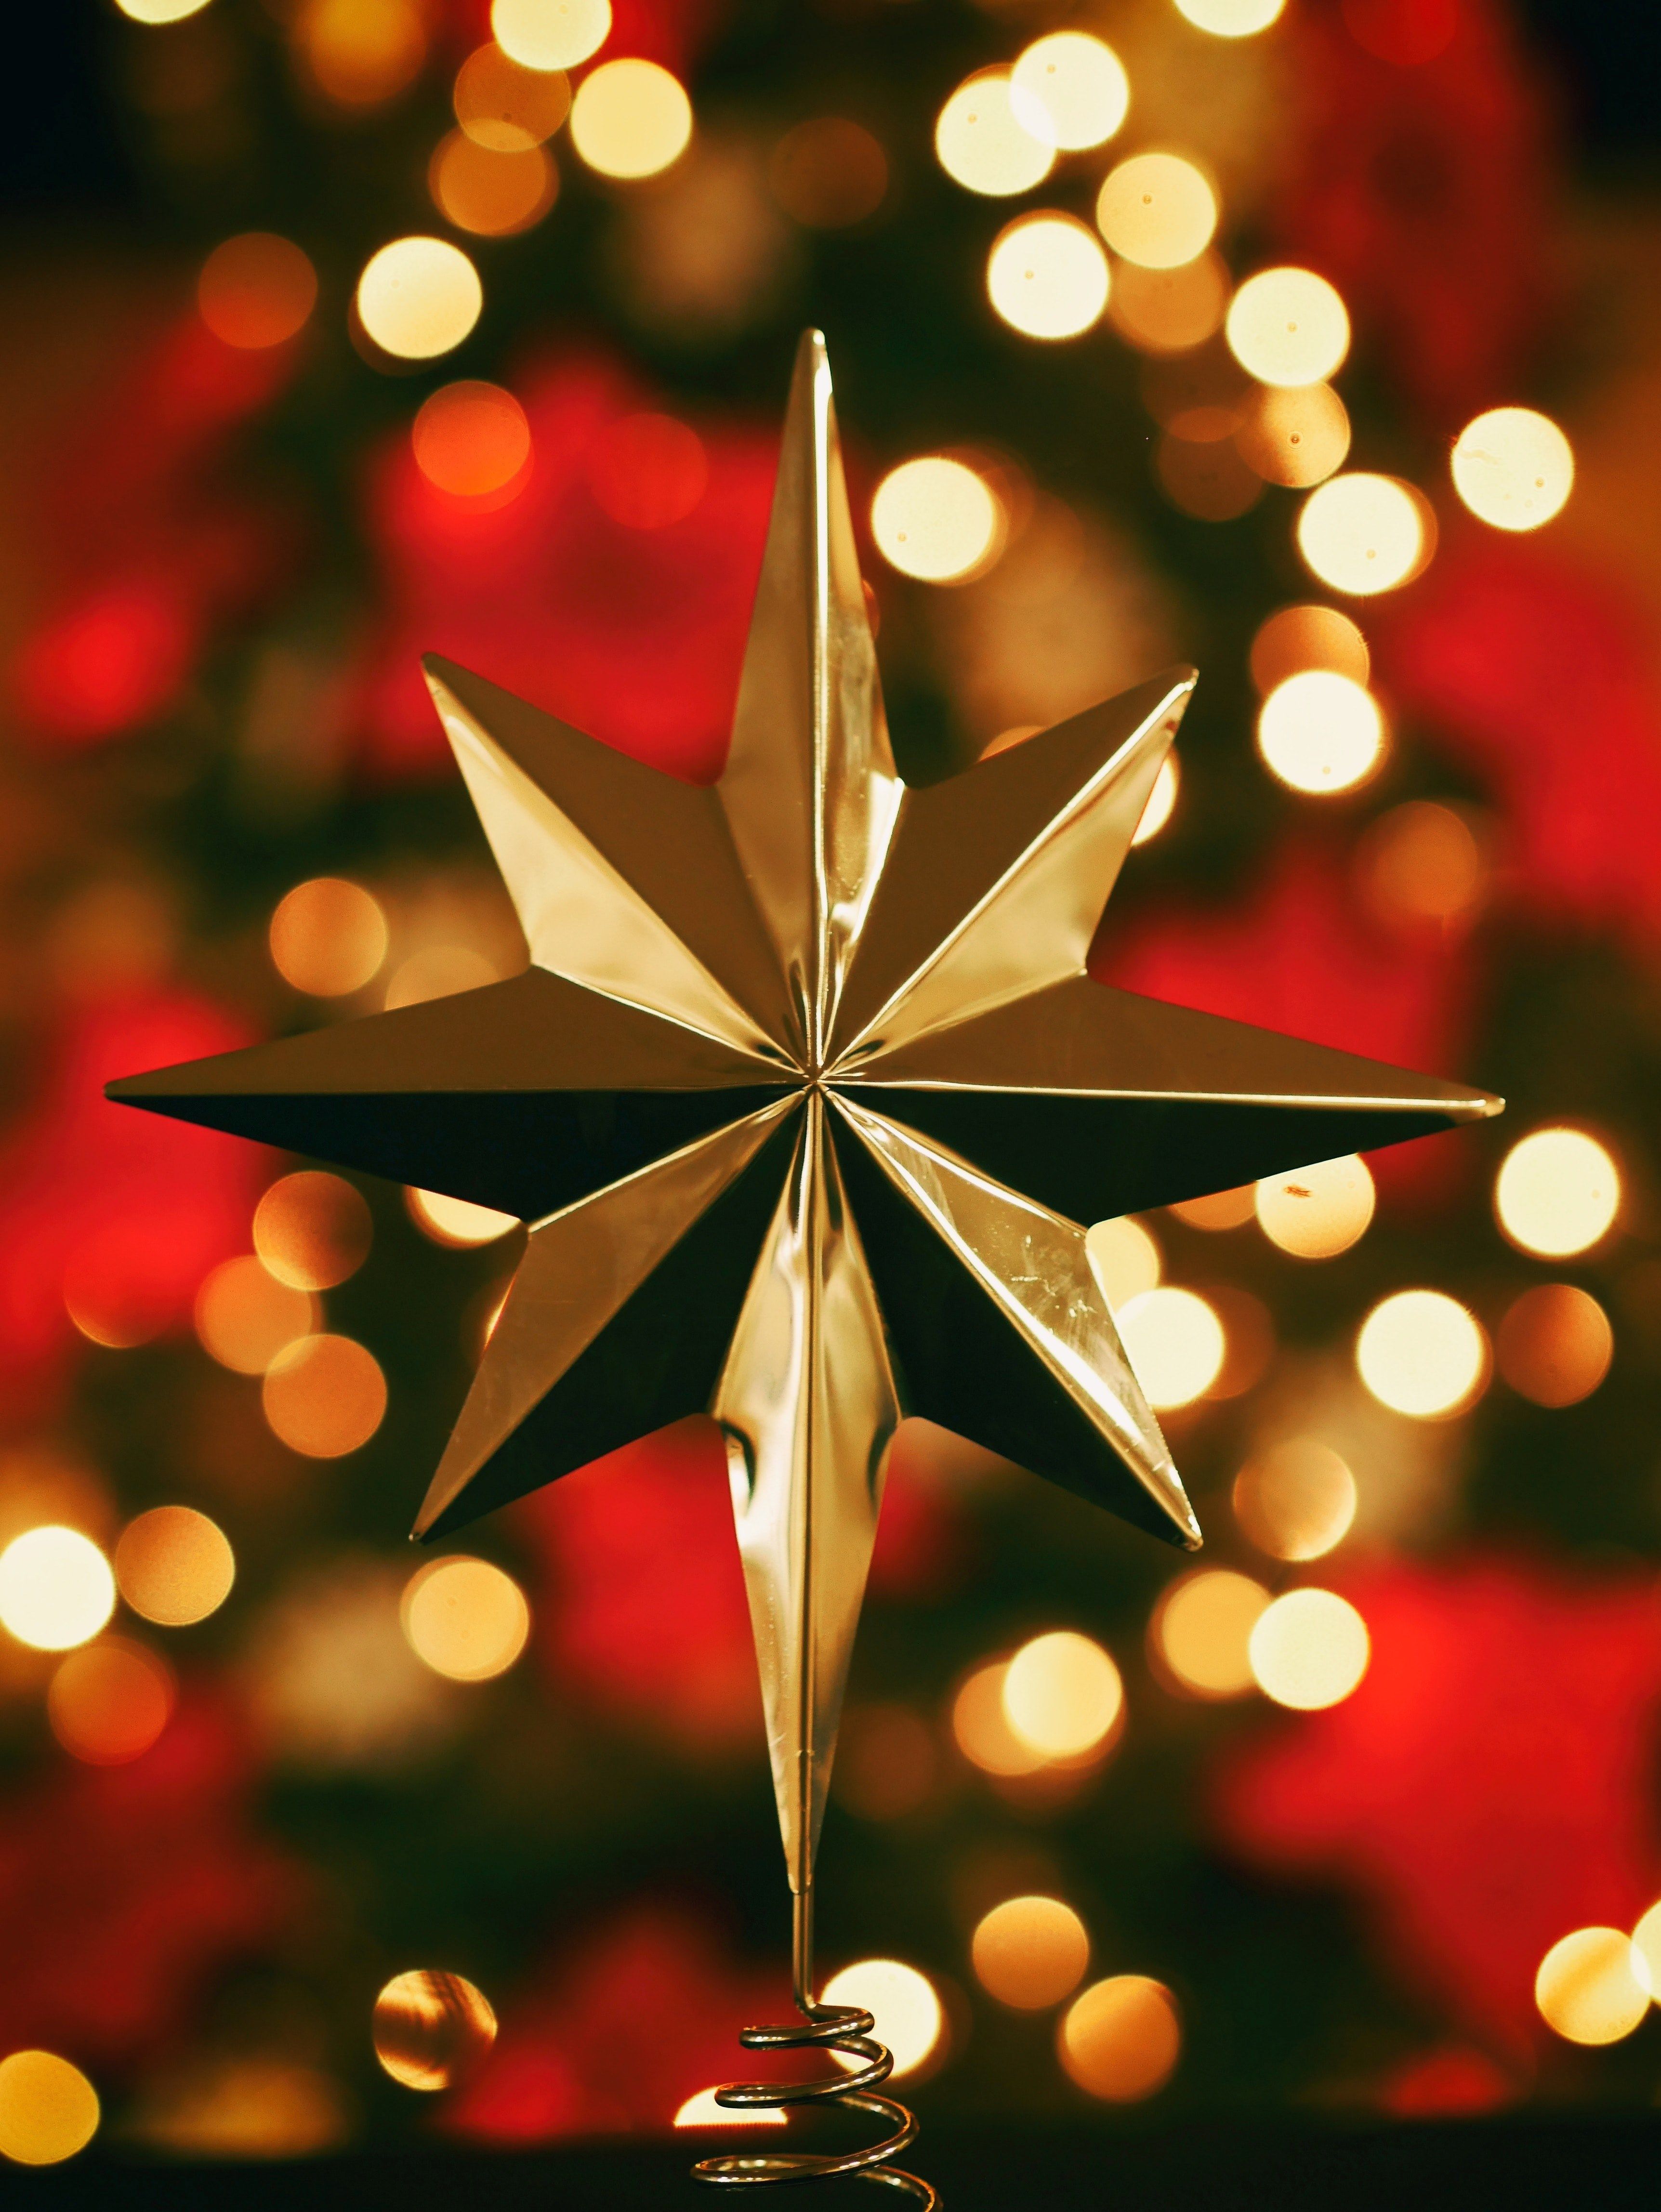 A gold star ornament on top of a Christmas tree. - Christmas lights